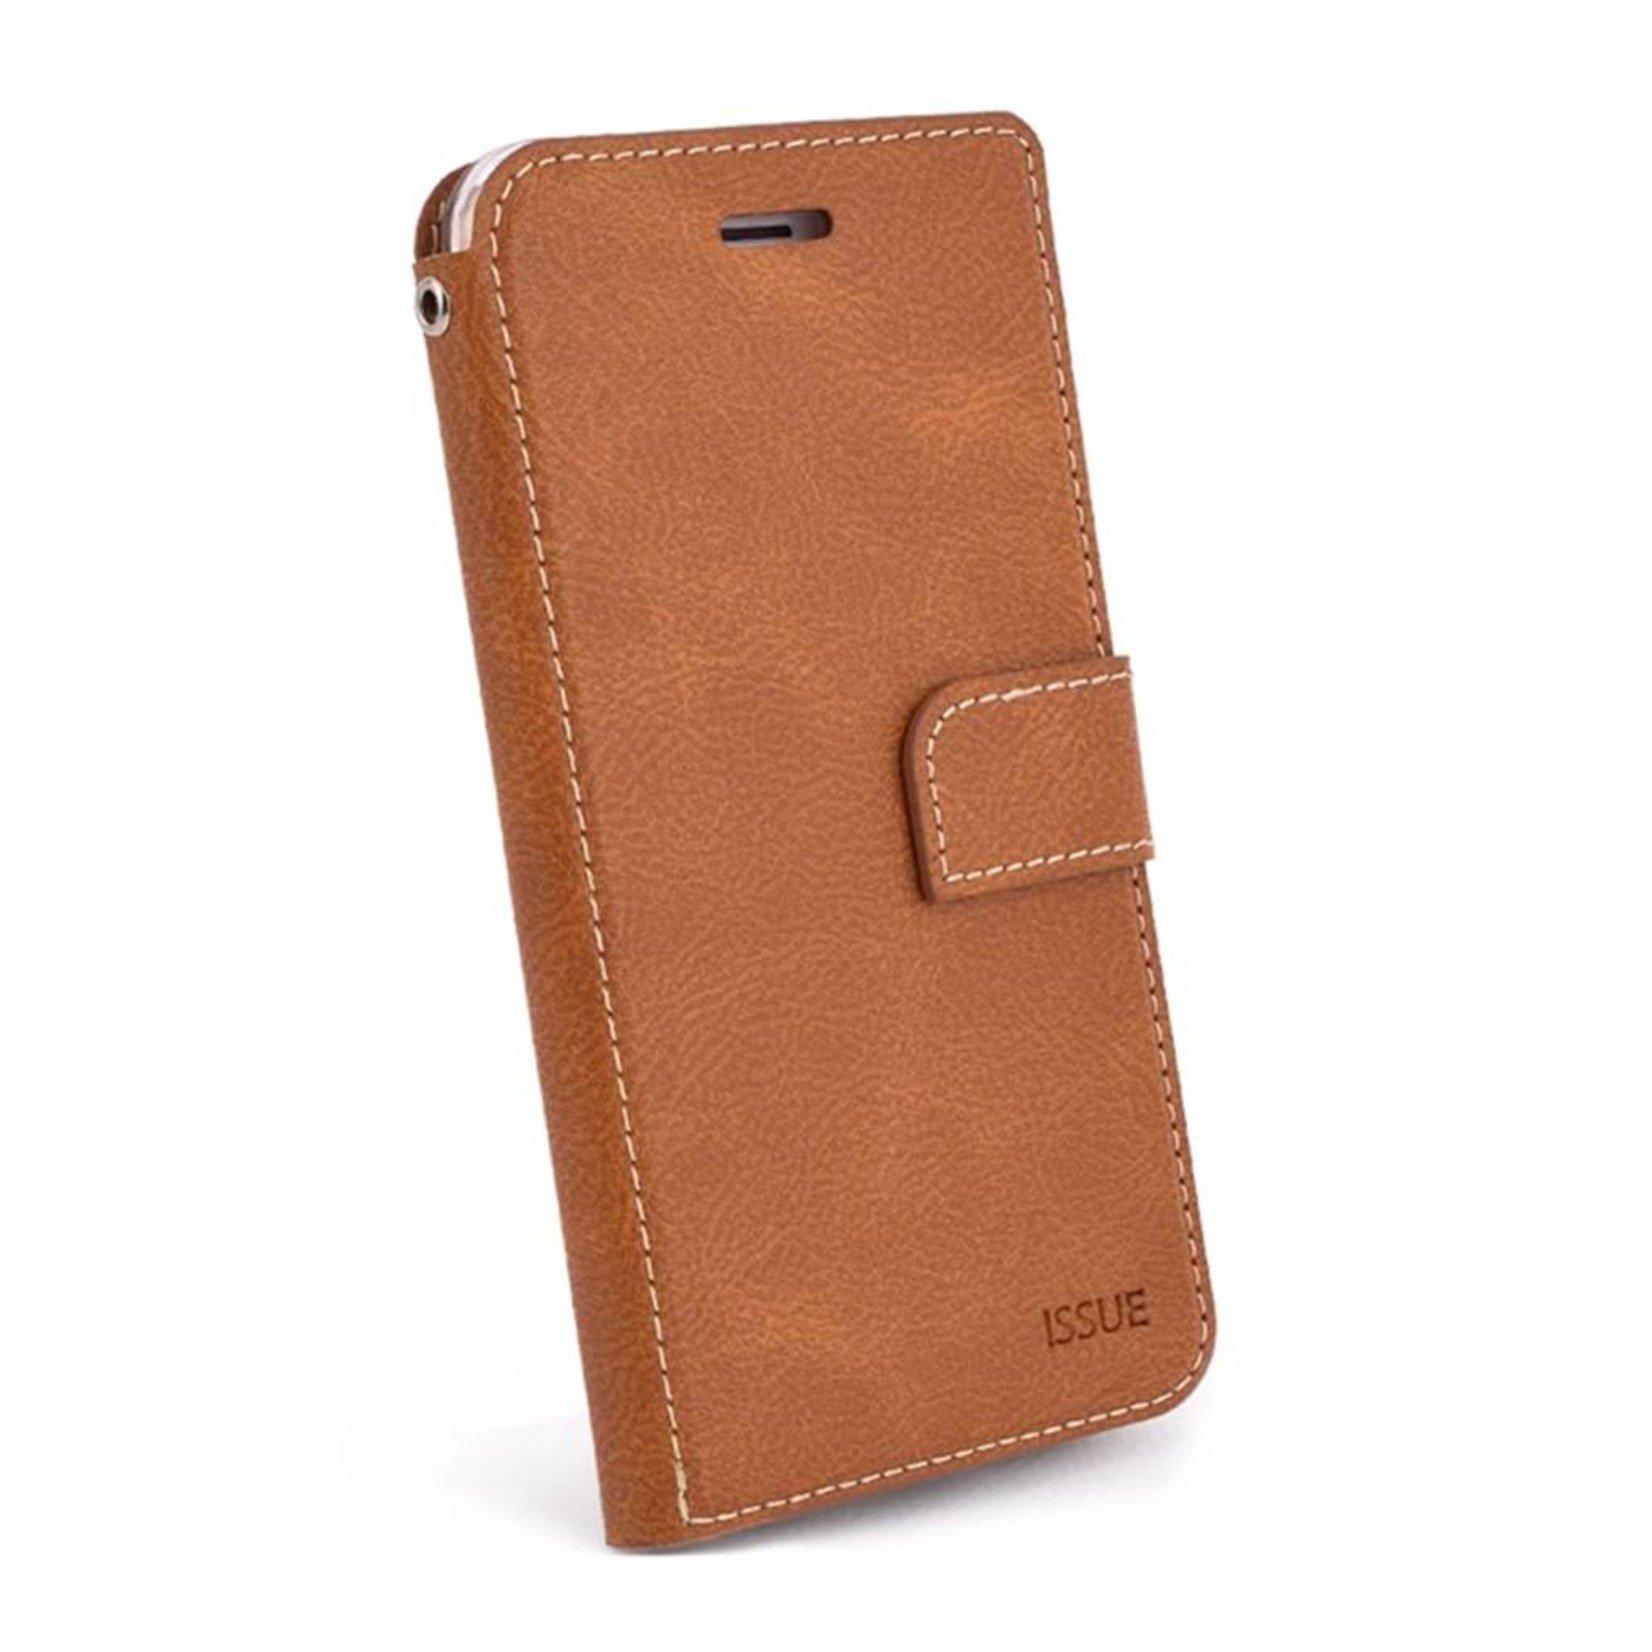 Molan Cano Issue Diary PU Leather Wallet Case for iPhone XS Max